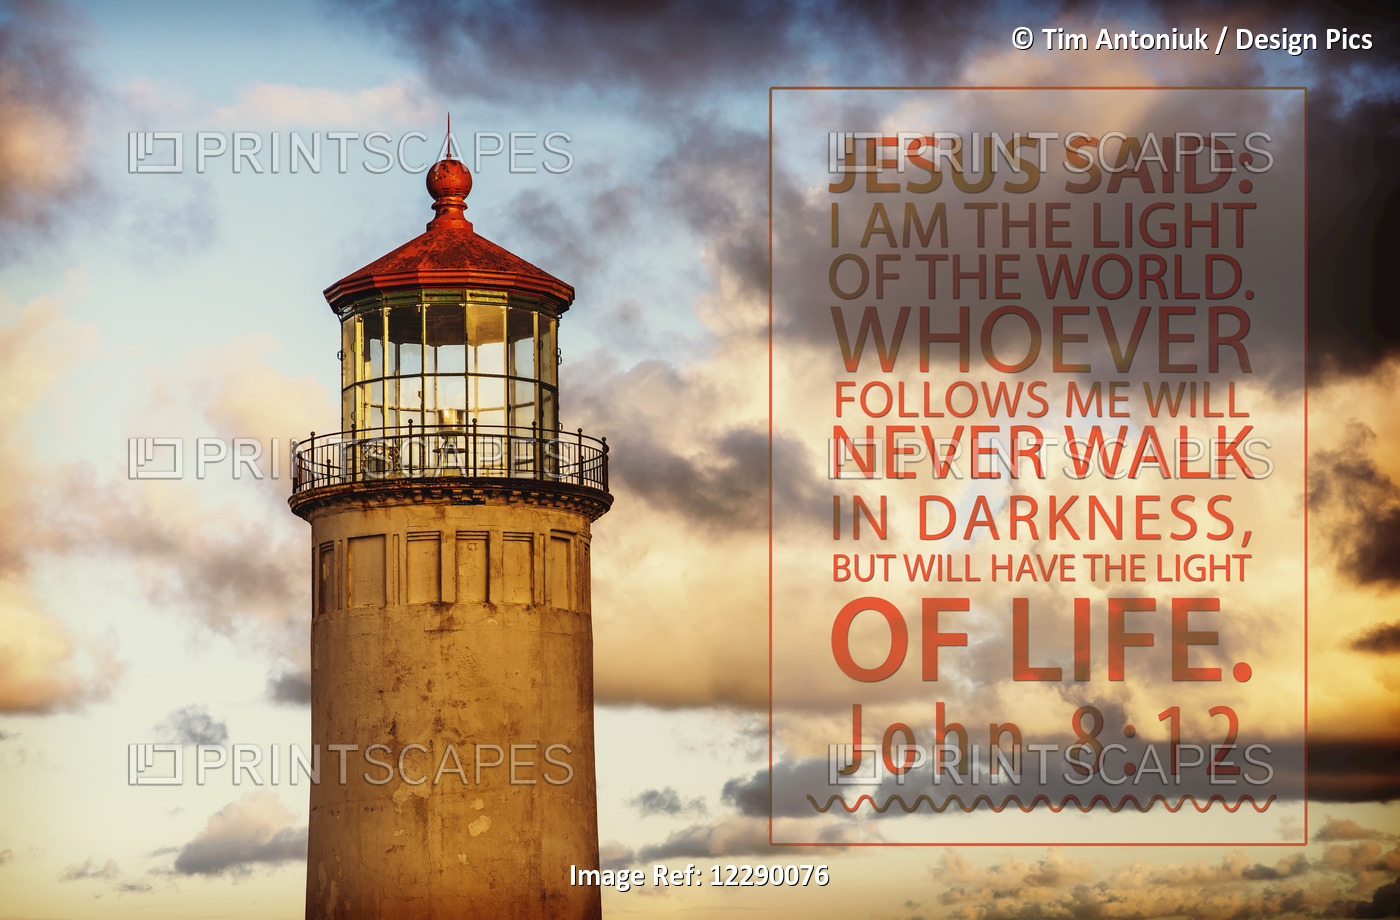 Image Of A Lighthouse Under A Sky Of Glowing Clouds And A Scripture From John ...